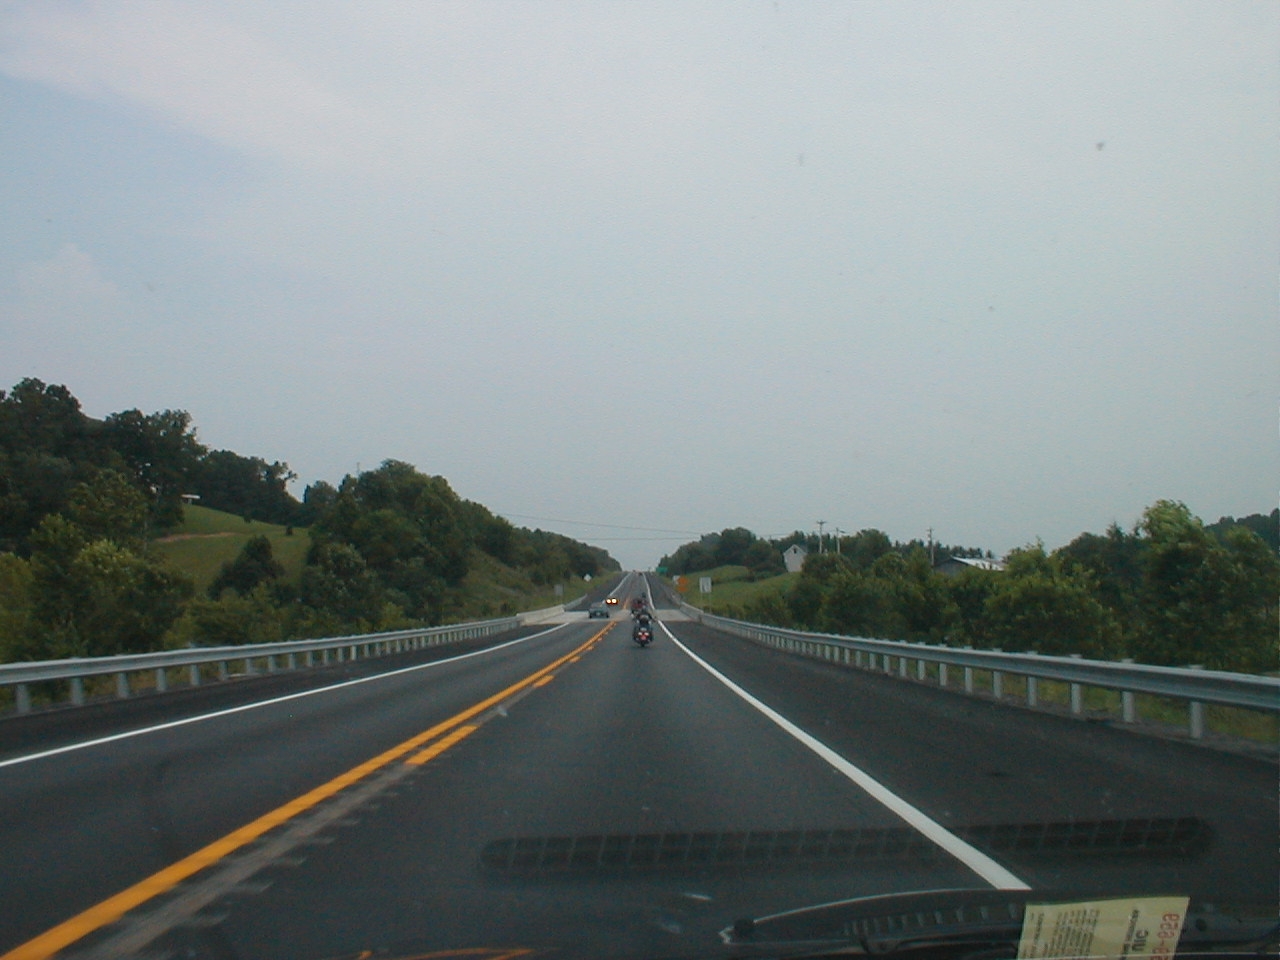 Typical section of the parkway.